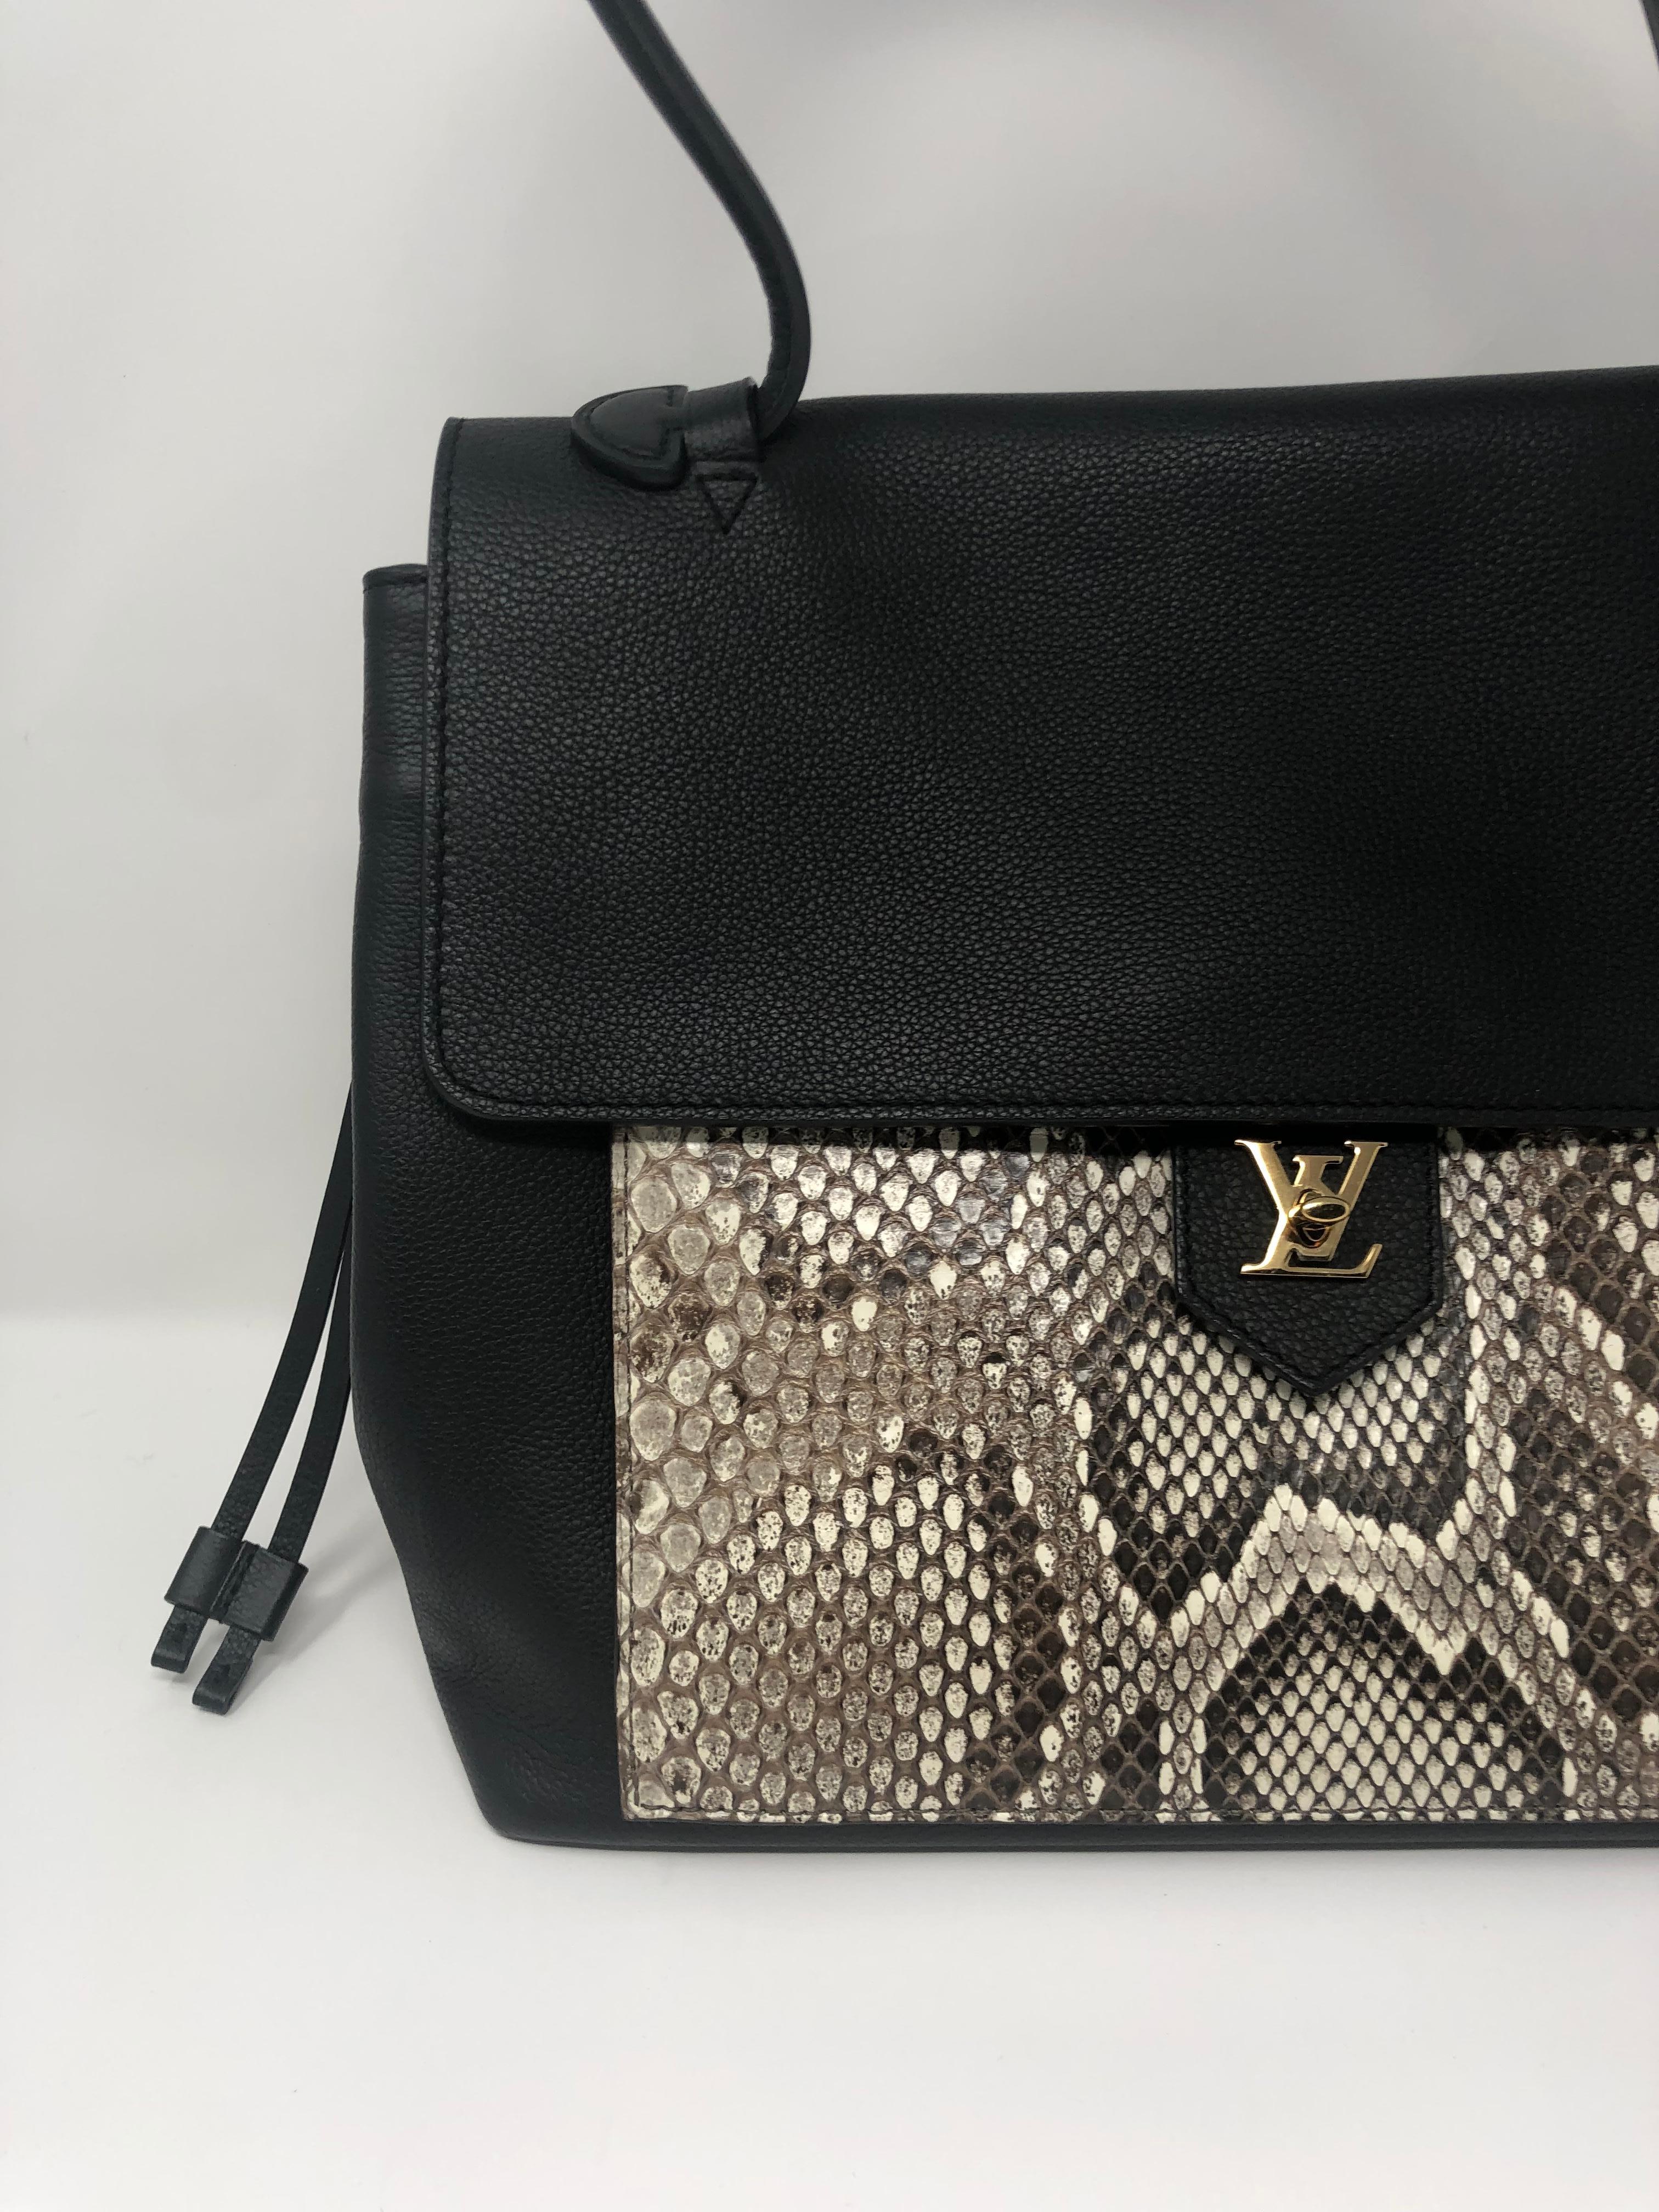 Louis Vuitton Calfskin Python Lockme MM in black leather. Beautiful python with black leather makes this bag a showstopper. LV turn lock on front of bag still has plastic on the inside. Never used. Bag is like new condition. The perfect size tote to